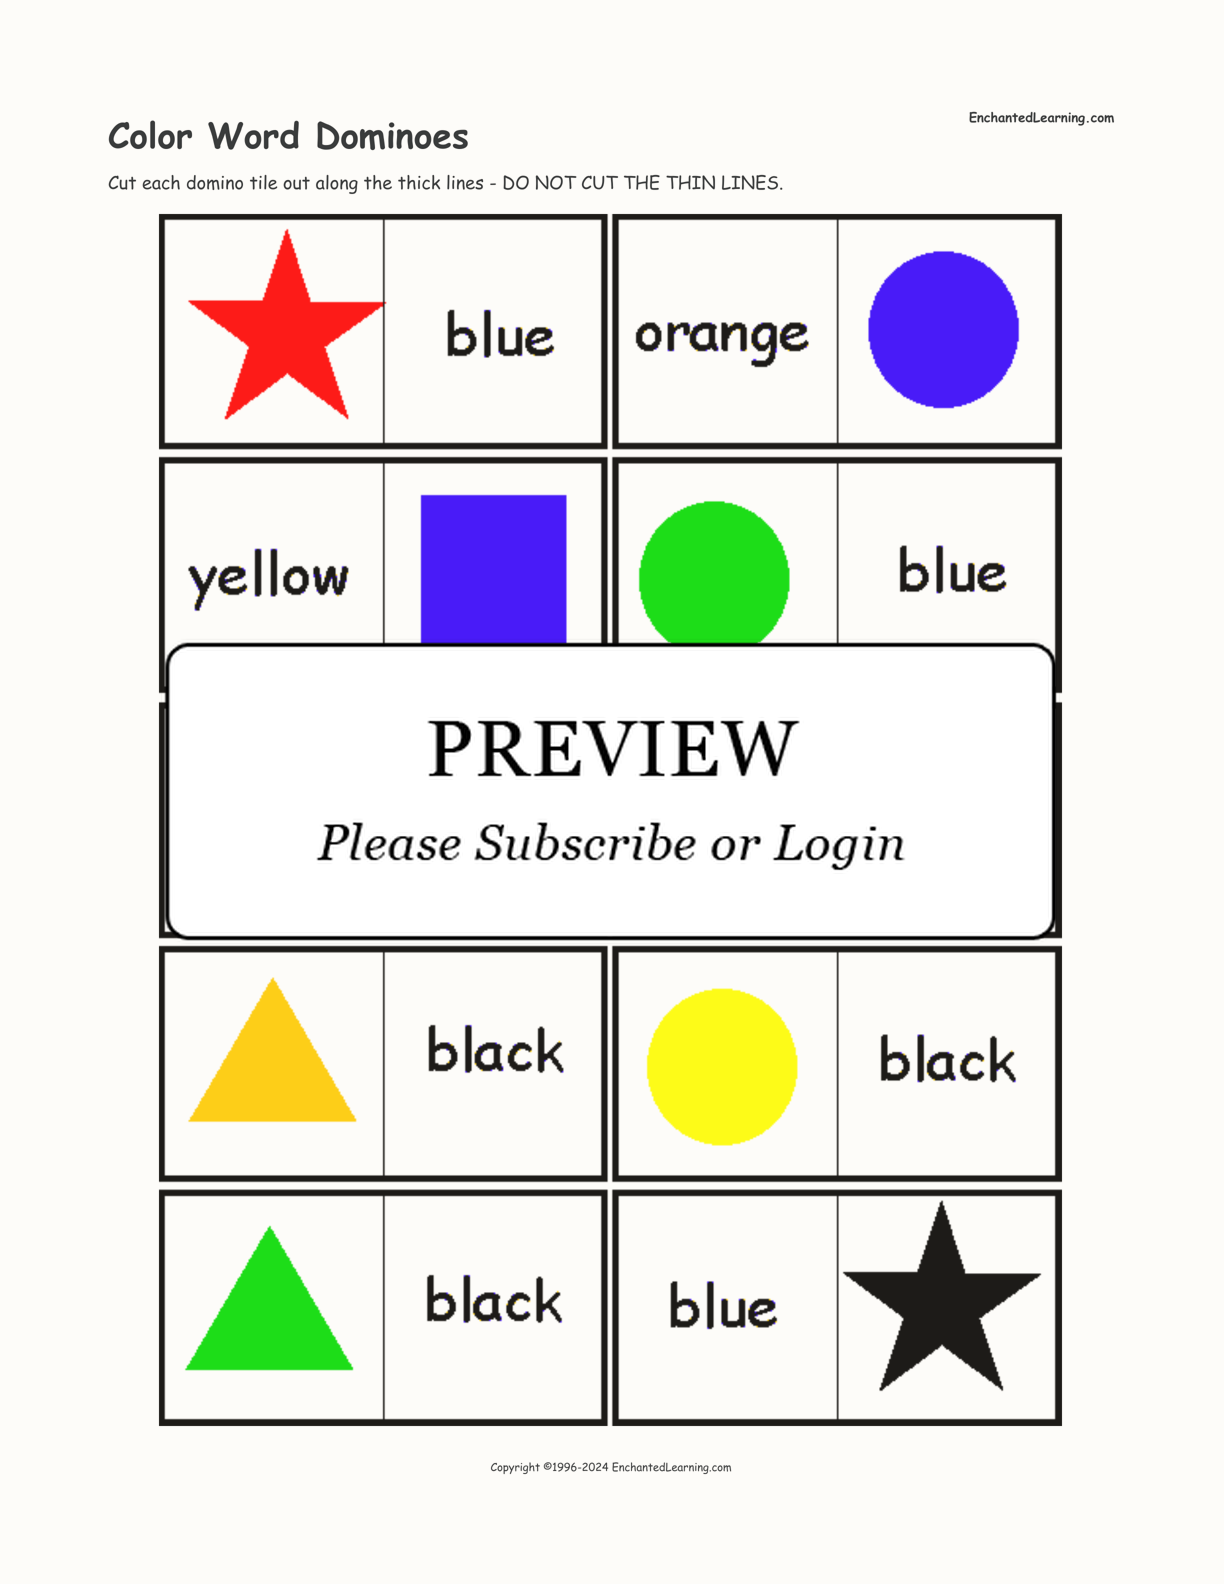 Color Word Dominoes interactive printout page 1